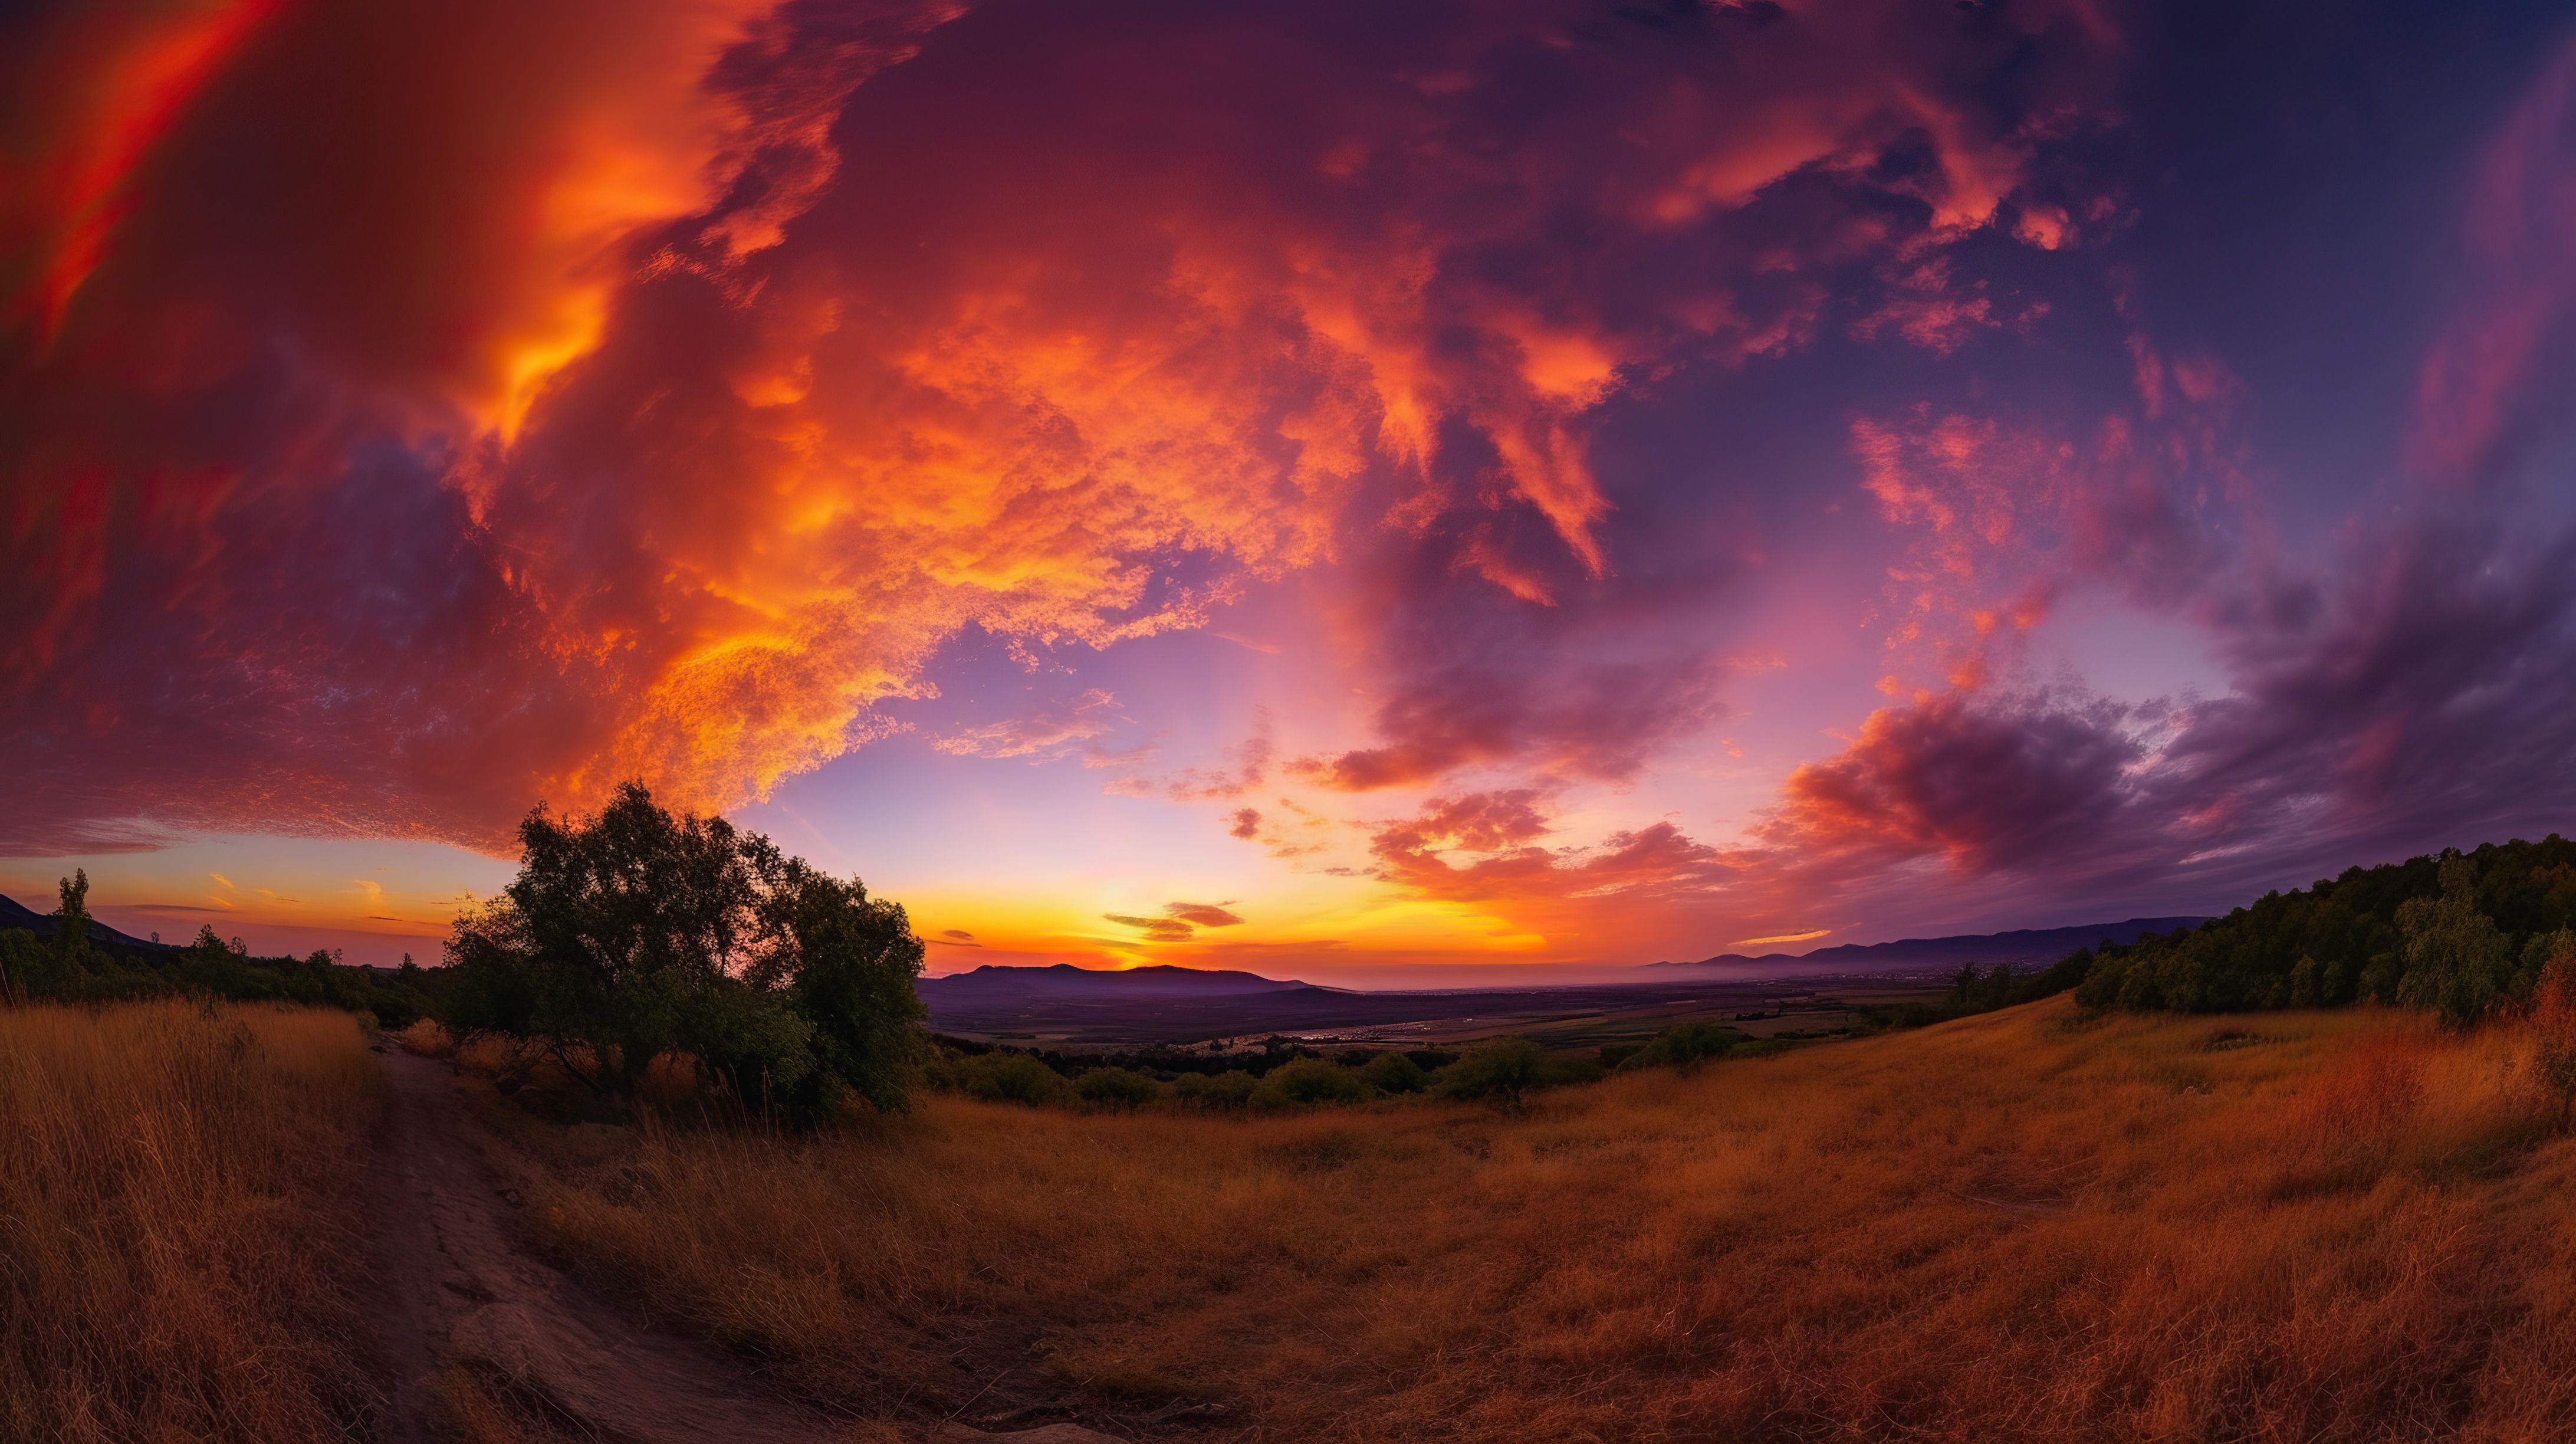 Stunning Sunset With Colorful Clouds Over a Field of Grass and Trees